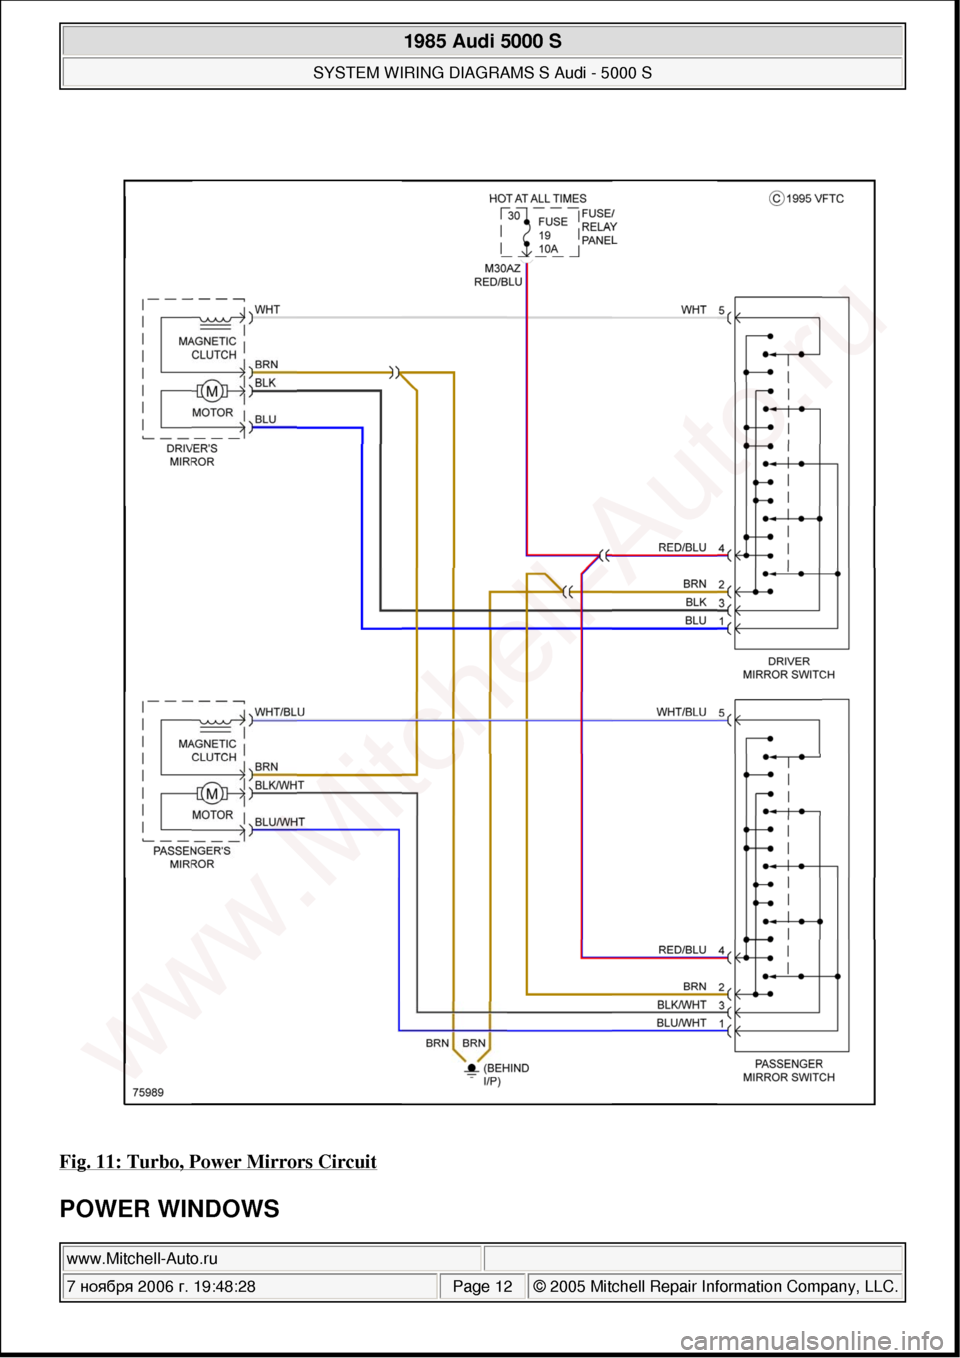 AUDI 5000S 1985 C2 System Wiring Diagram 
Fig. 11: Turbo, Power Mirrors Circuit 
POWER WINDOWS 
 
1985 Audi 5000 S 
SYSTEM WIRING DIAGRAMS S Audi - 5000 S  
www.Mitchell-Auto.ru  
7 ноября  2006 г. 19:48:28Page 12 © 2005 Mitchell Rep